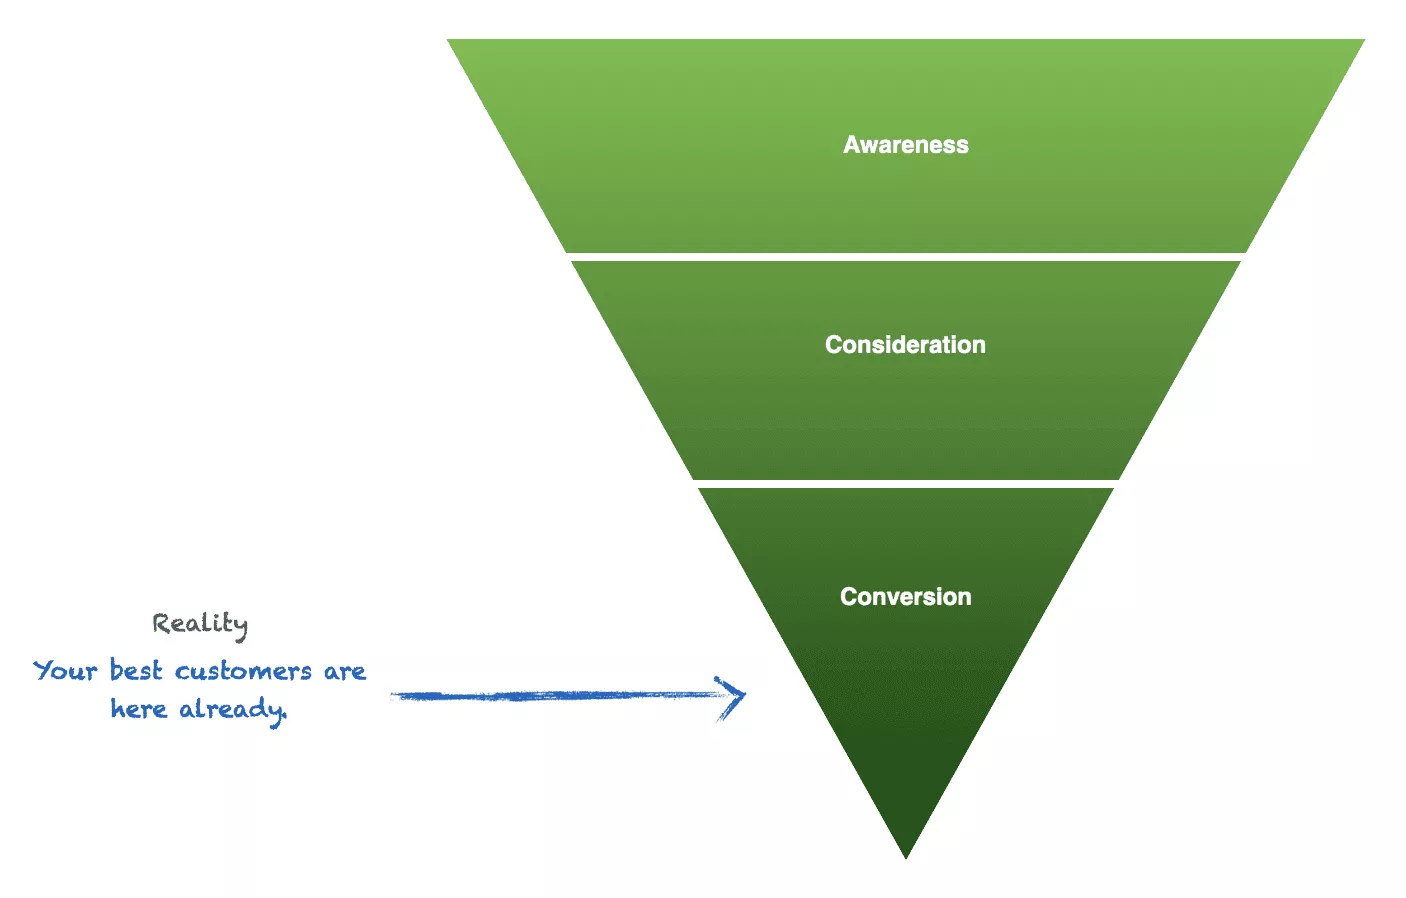 Reality: A lot of your customers are already at the Bottom of the Funnel - Conversion